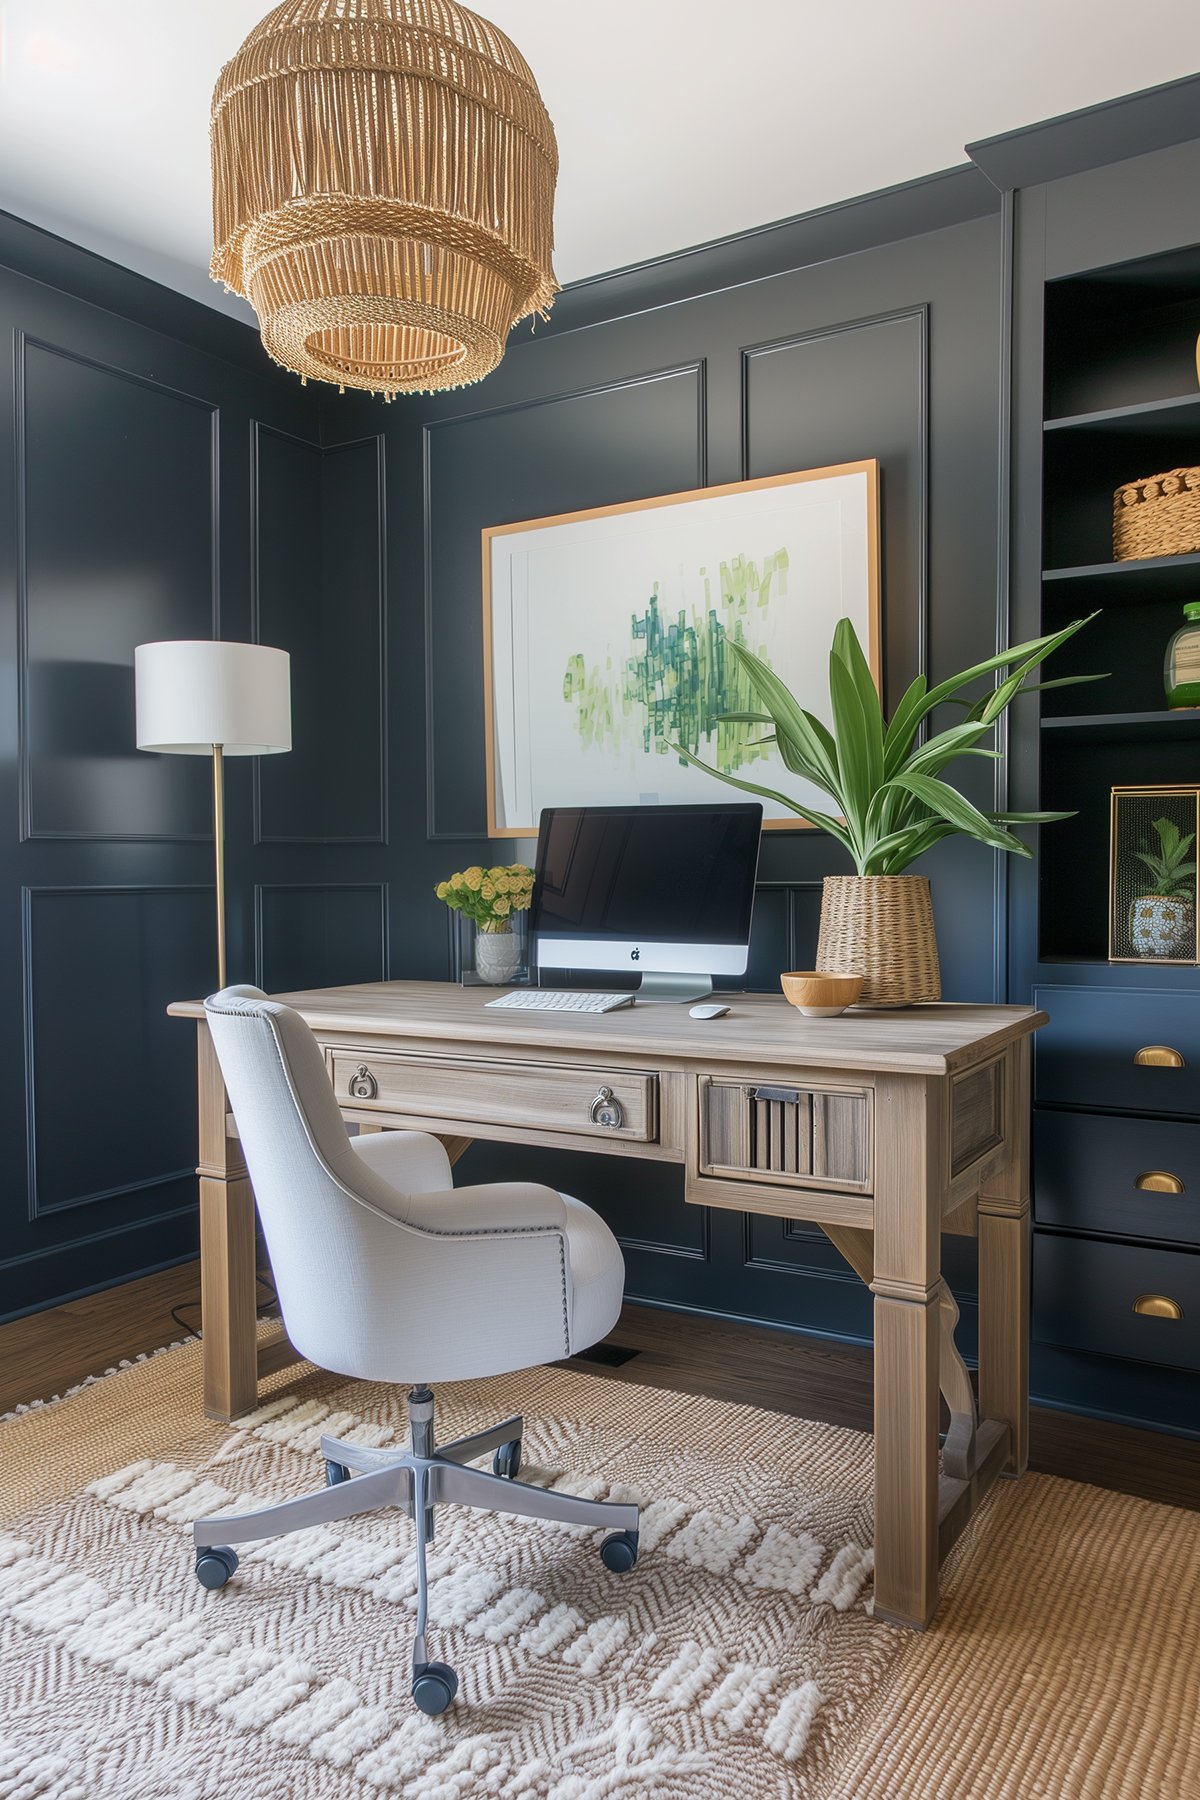 Small modern office with picture frame molding walls painted Benjamin Moore Hale navy.